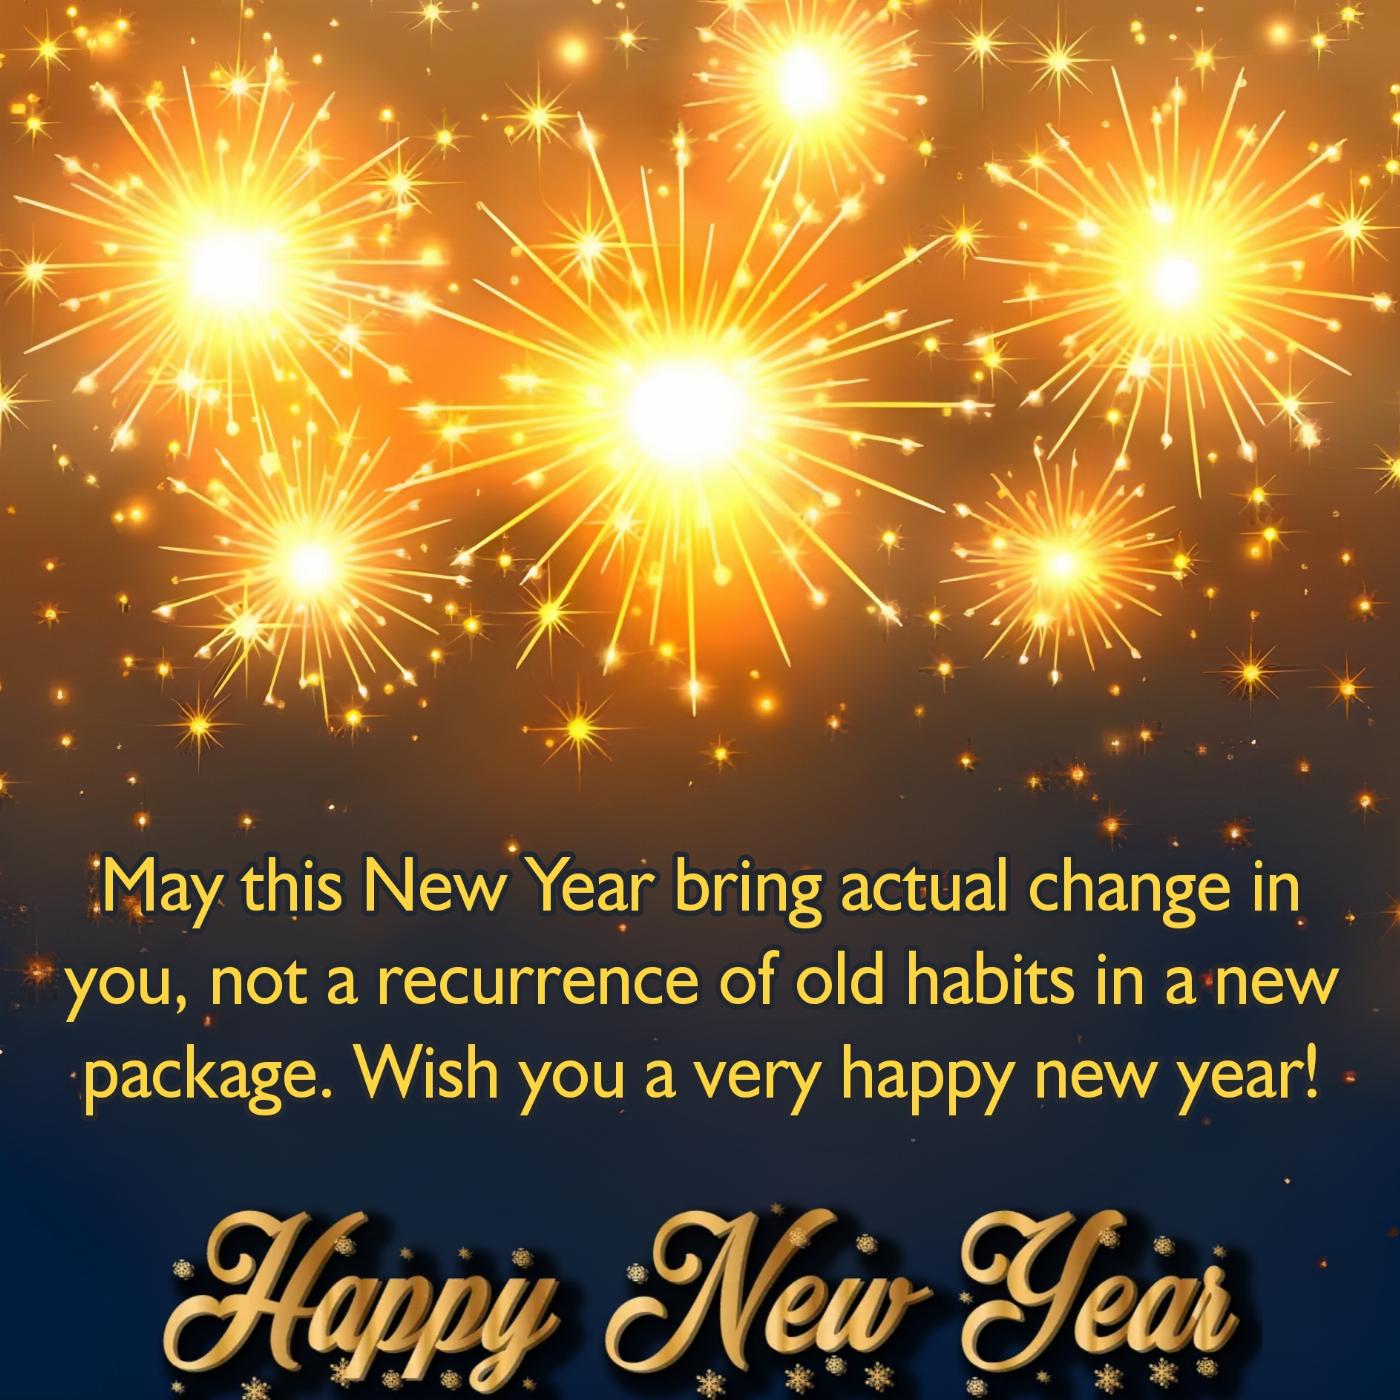 May this New Year bring actual change in you